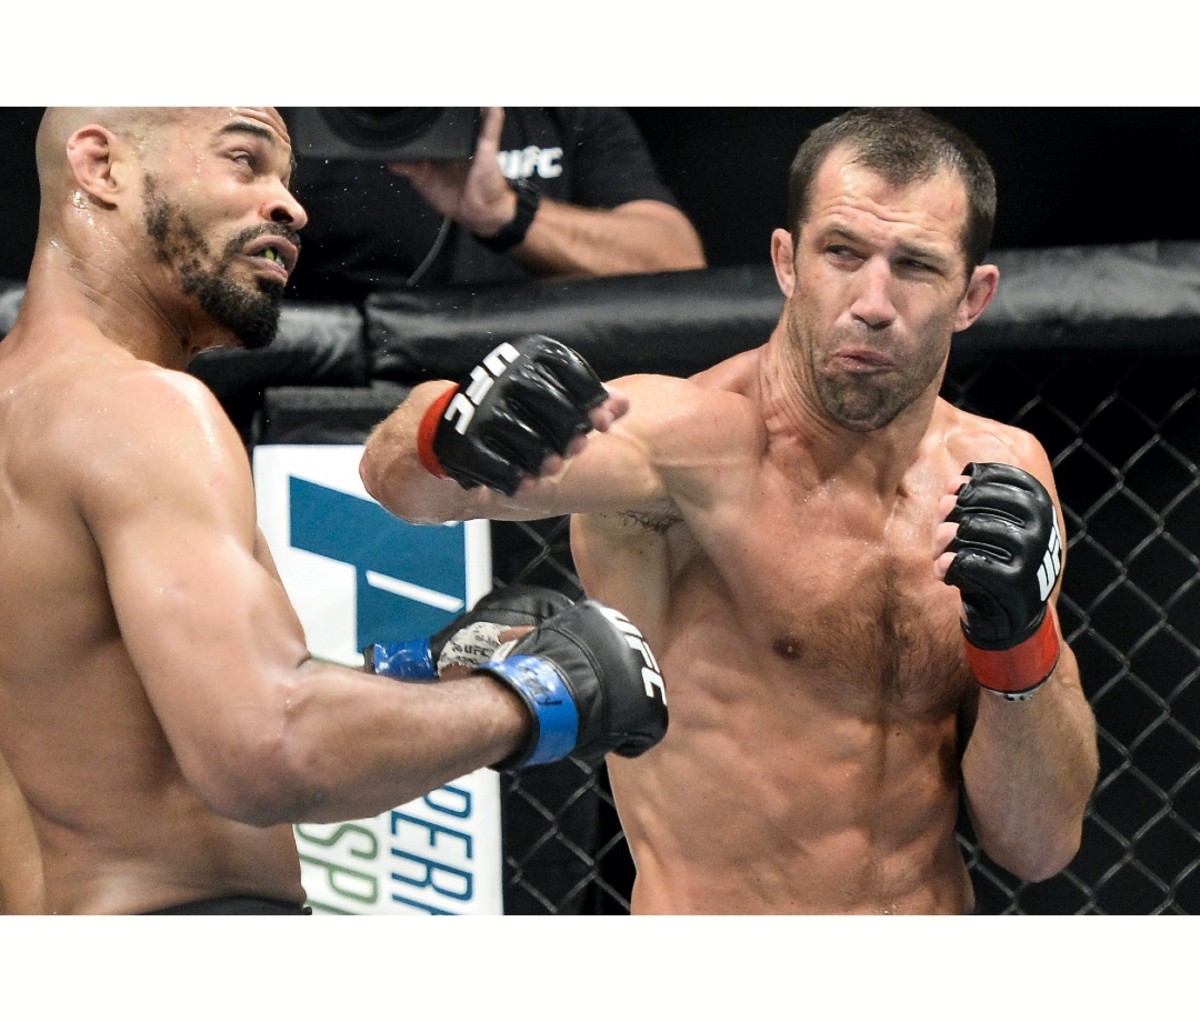 UFC fighter Luke Rockhold throwing a punch